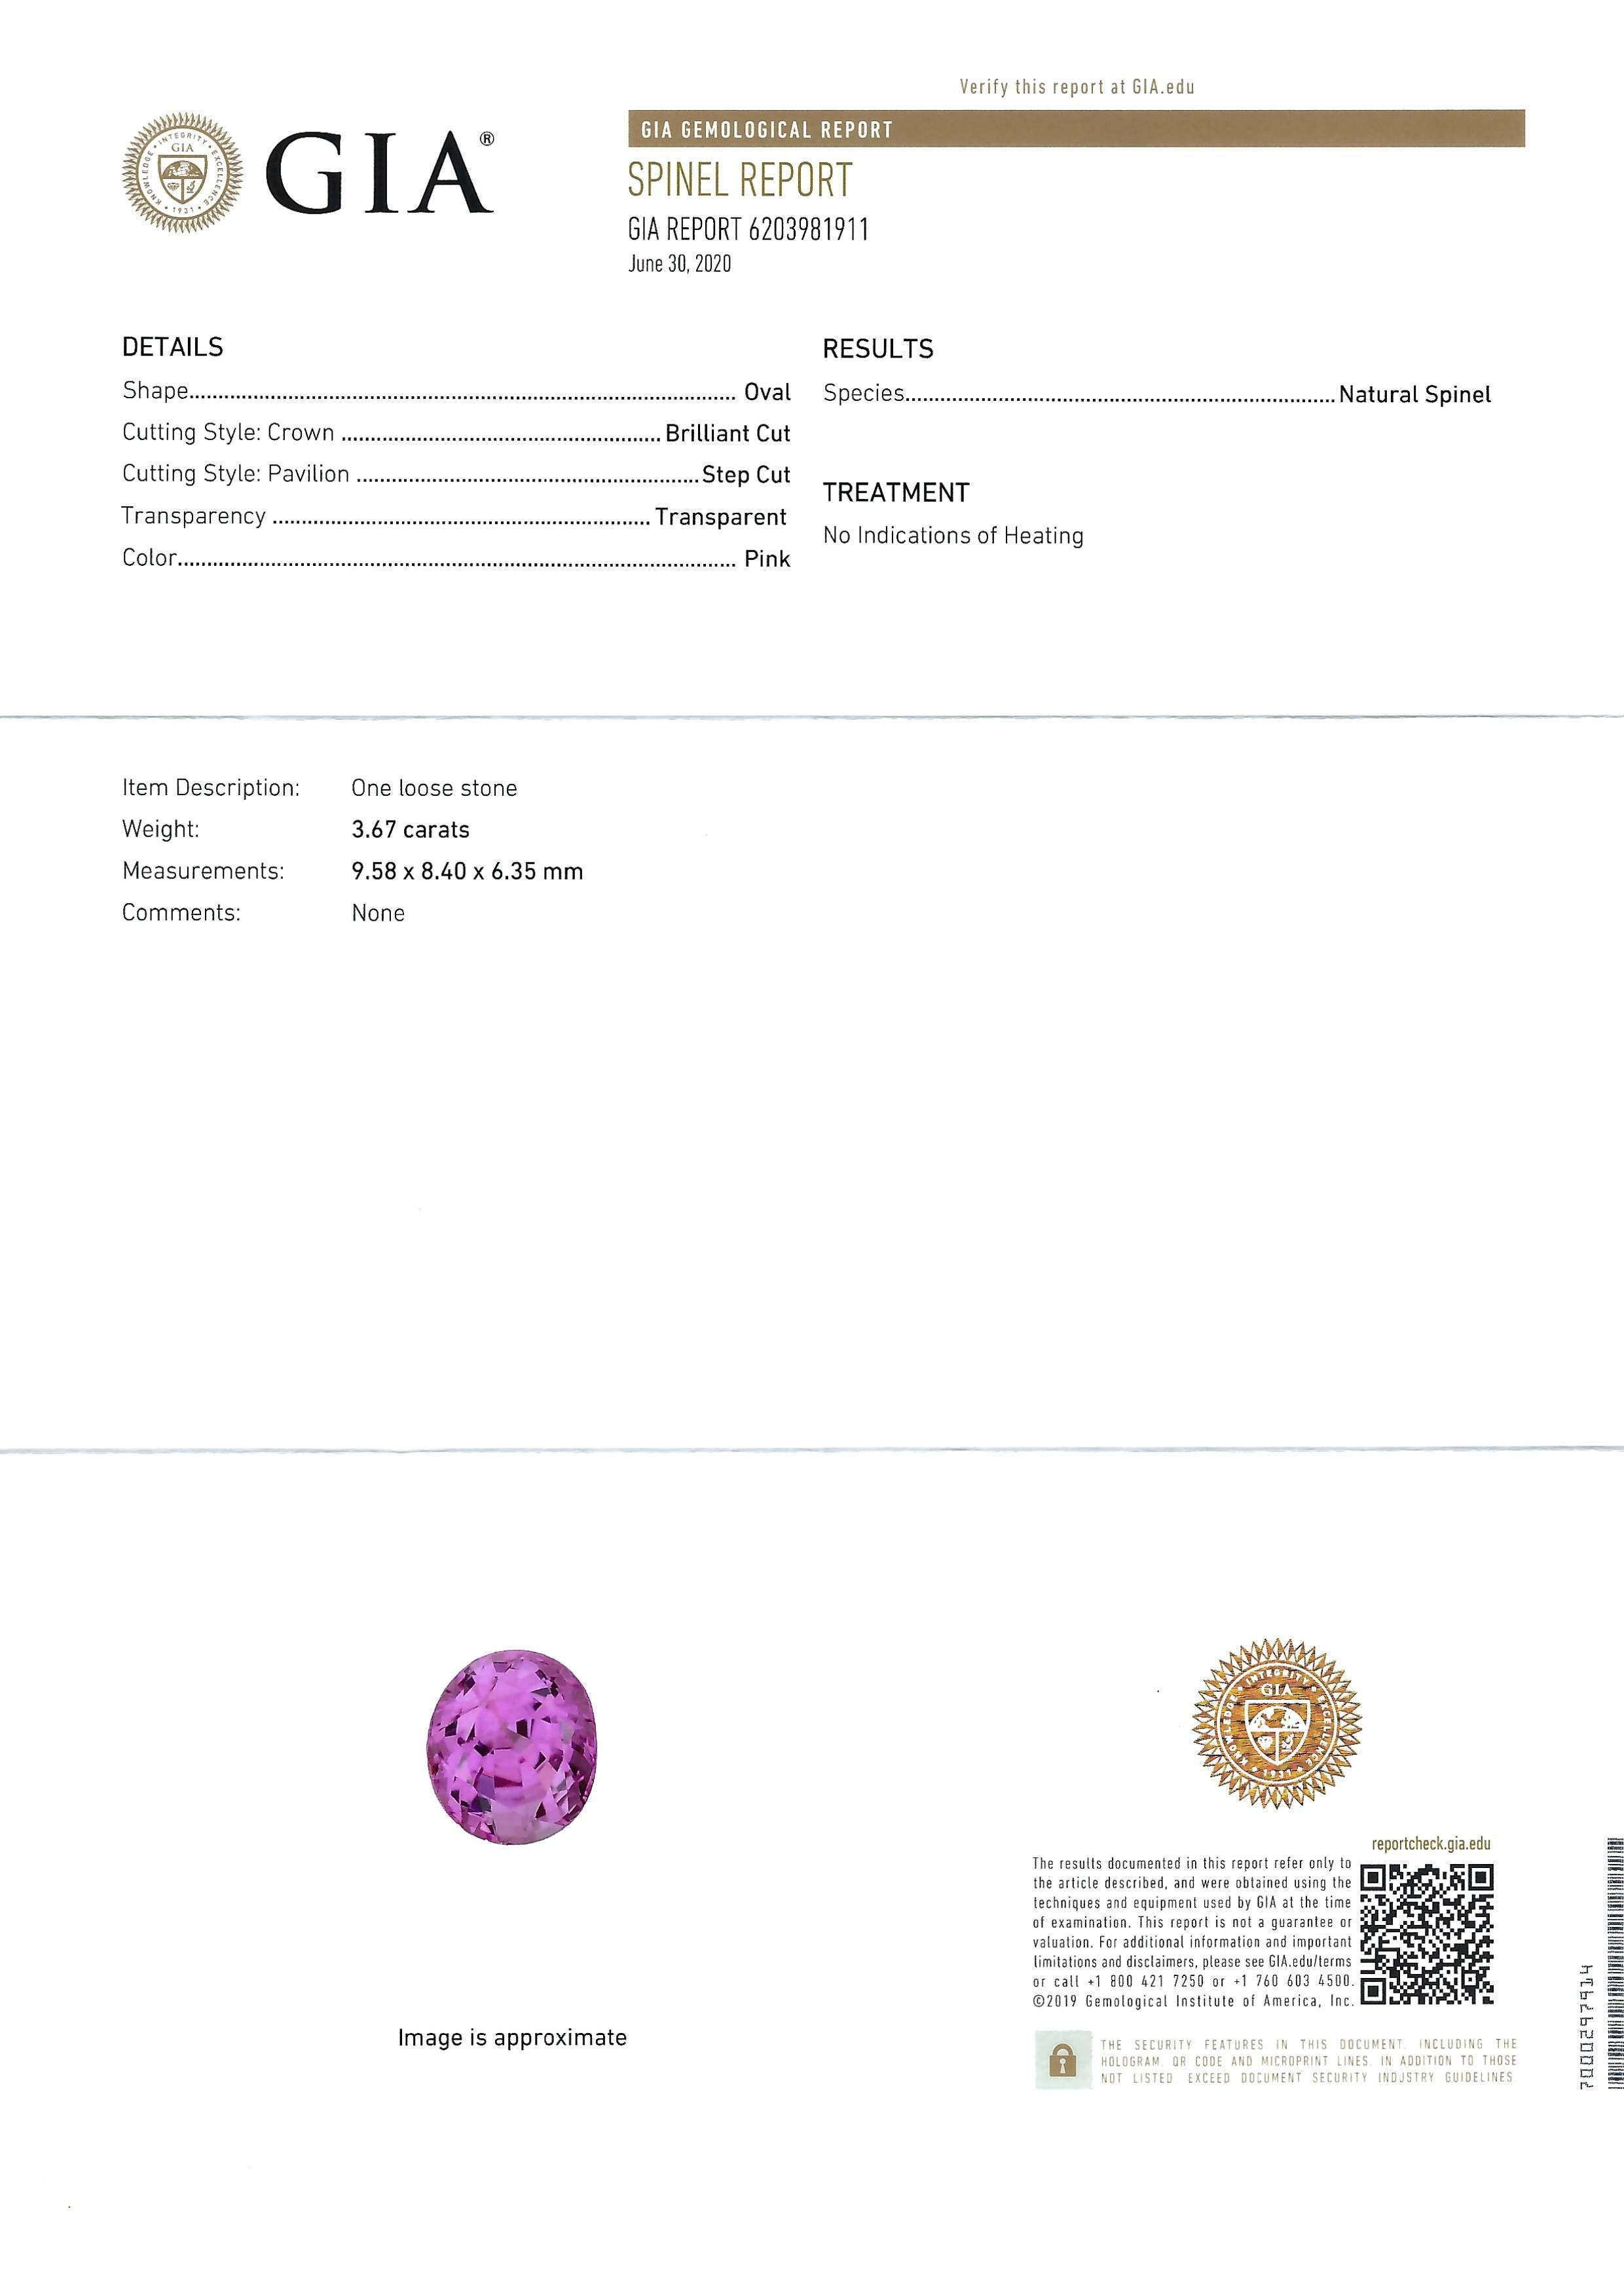 Round Cut NEW GIA 3.67CT Untreated Natural Hot Pink Spinel Diamond Ring 14K Yellow Gold  For Sale